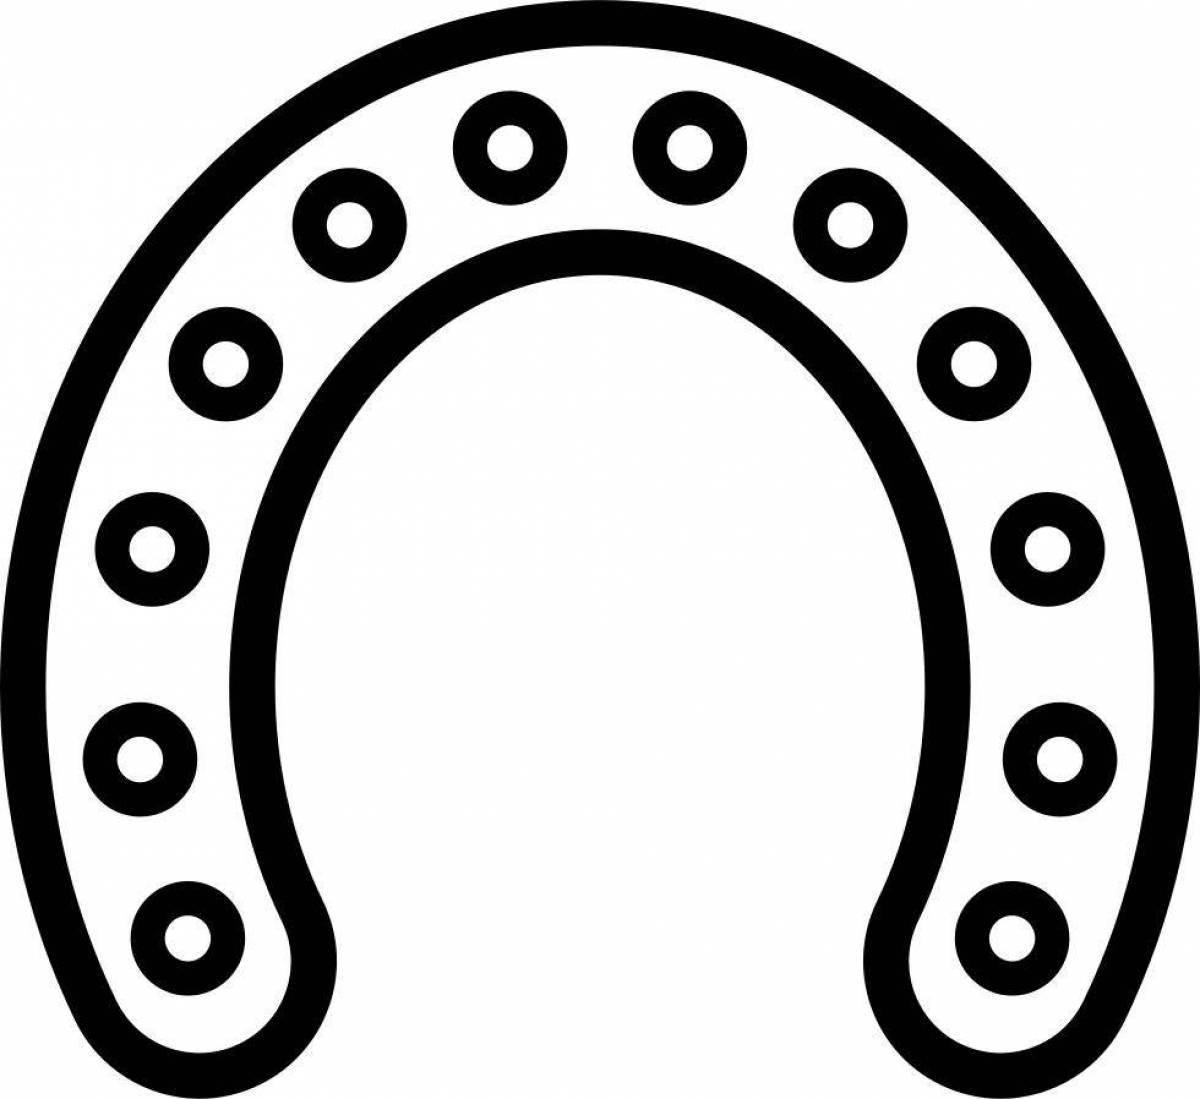 Charming horseshoe coloring page for juniors